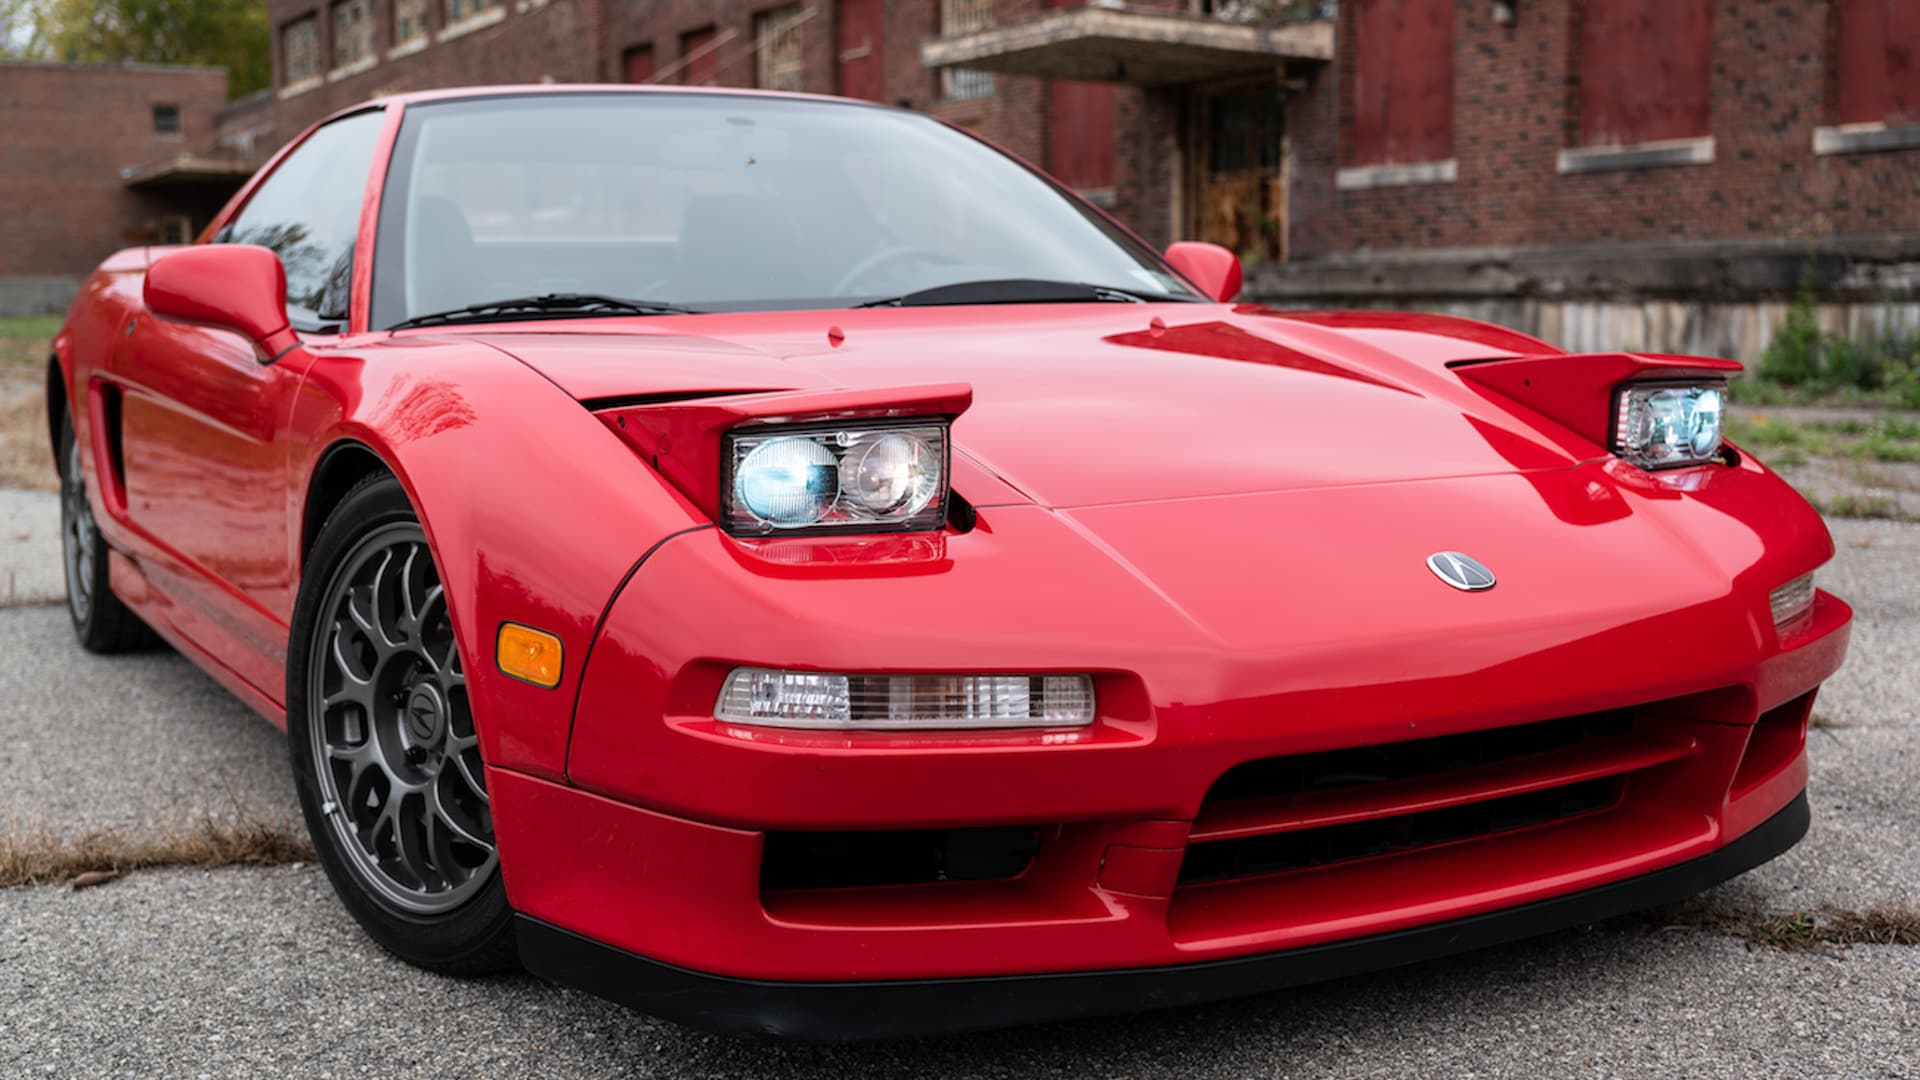 A to Z: This 1999 Acura NSX Alex Zanardi Edition Just Sold for $140,000